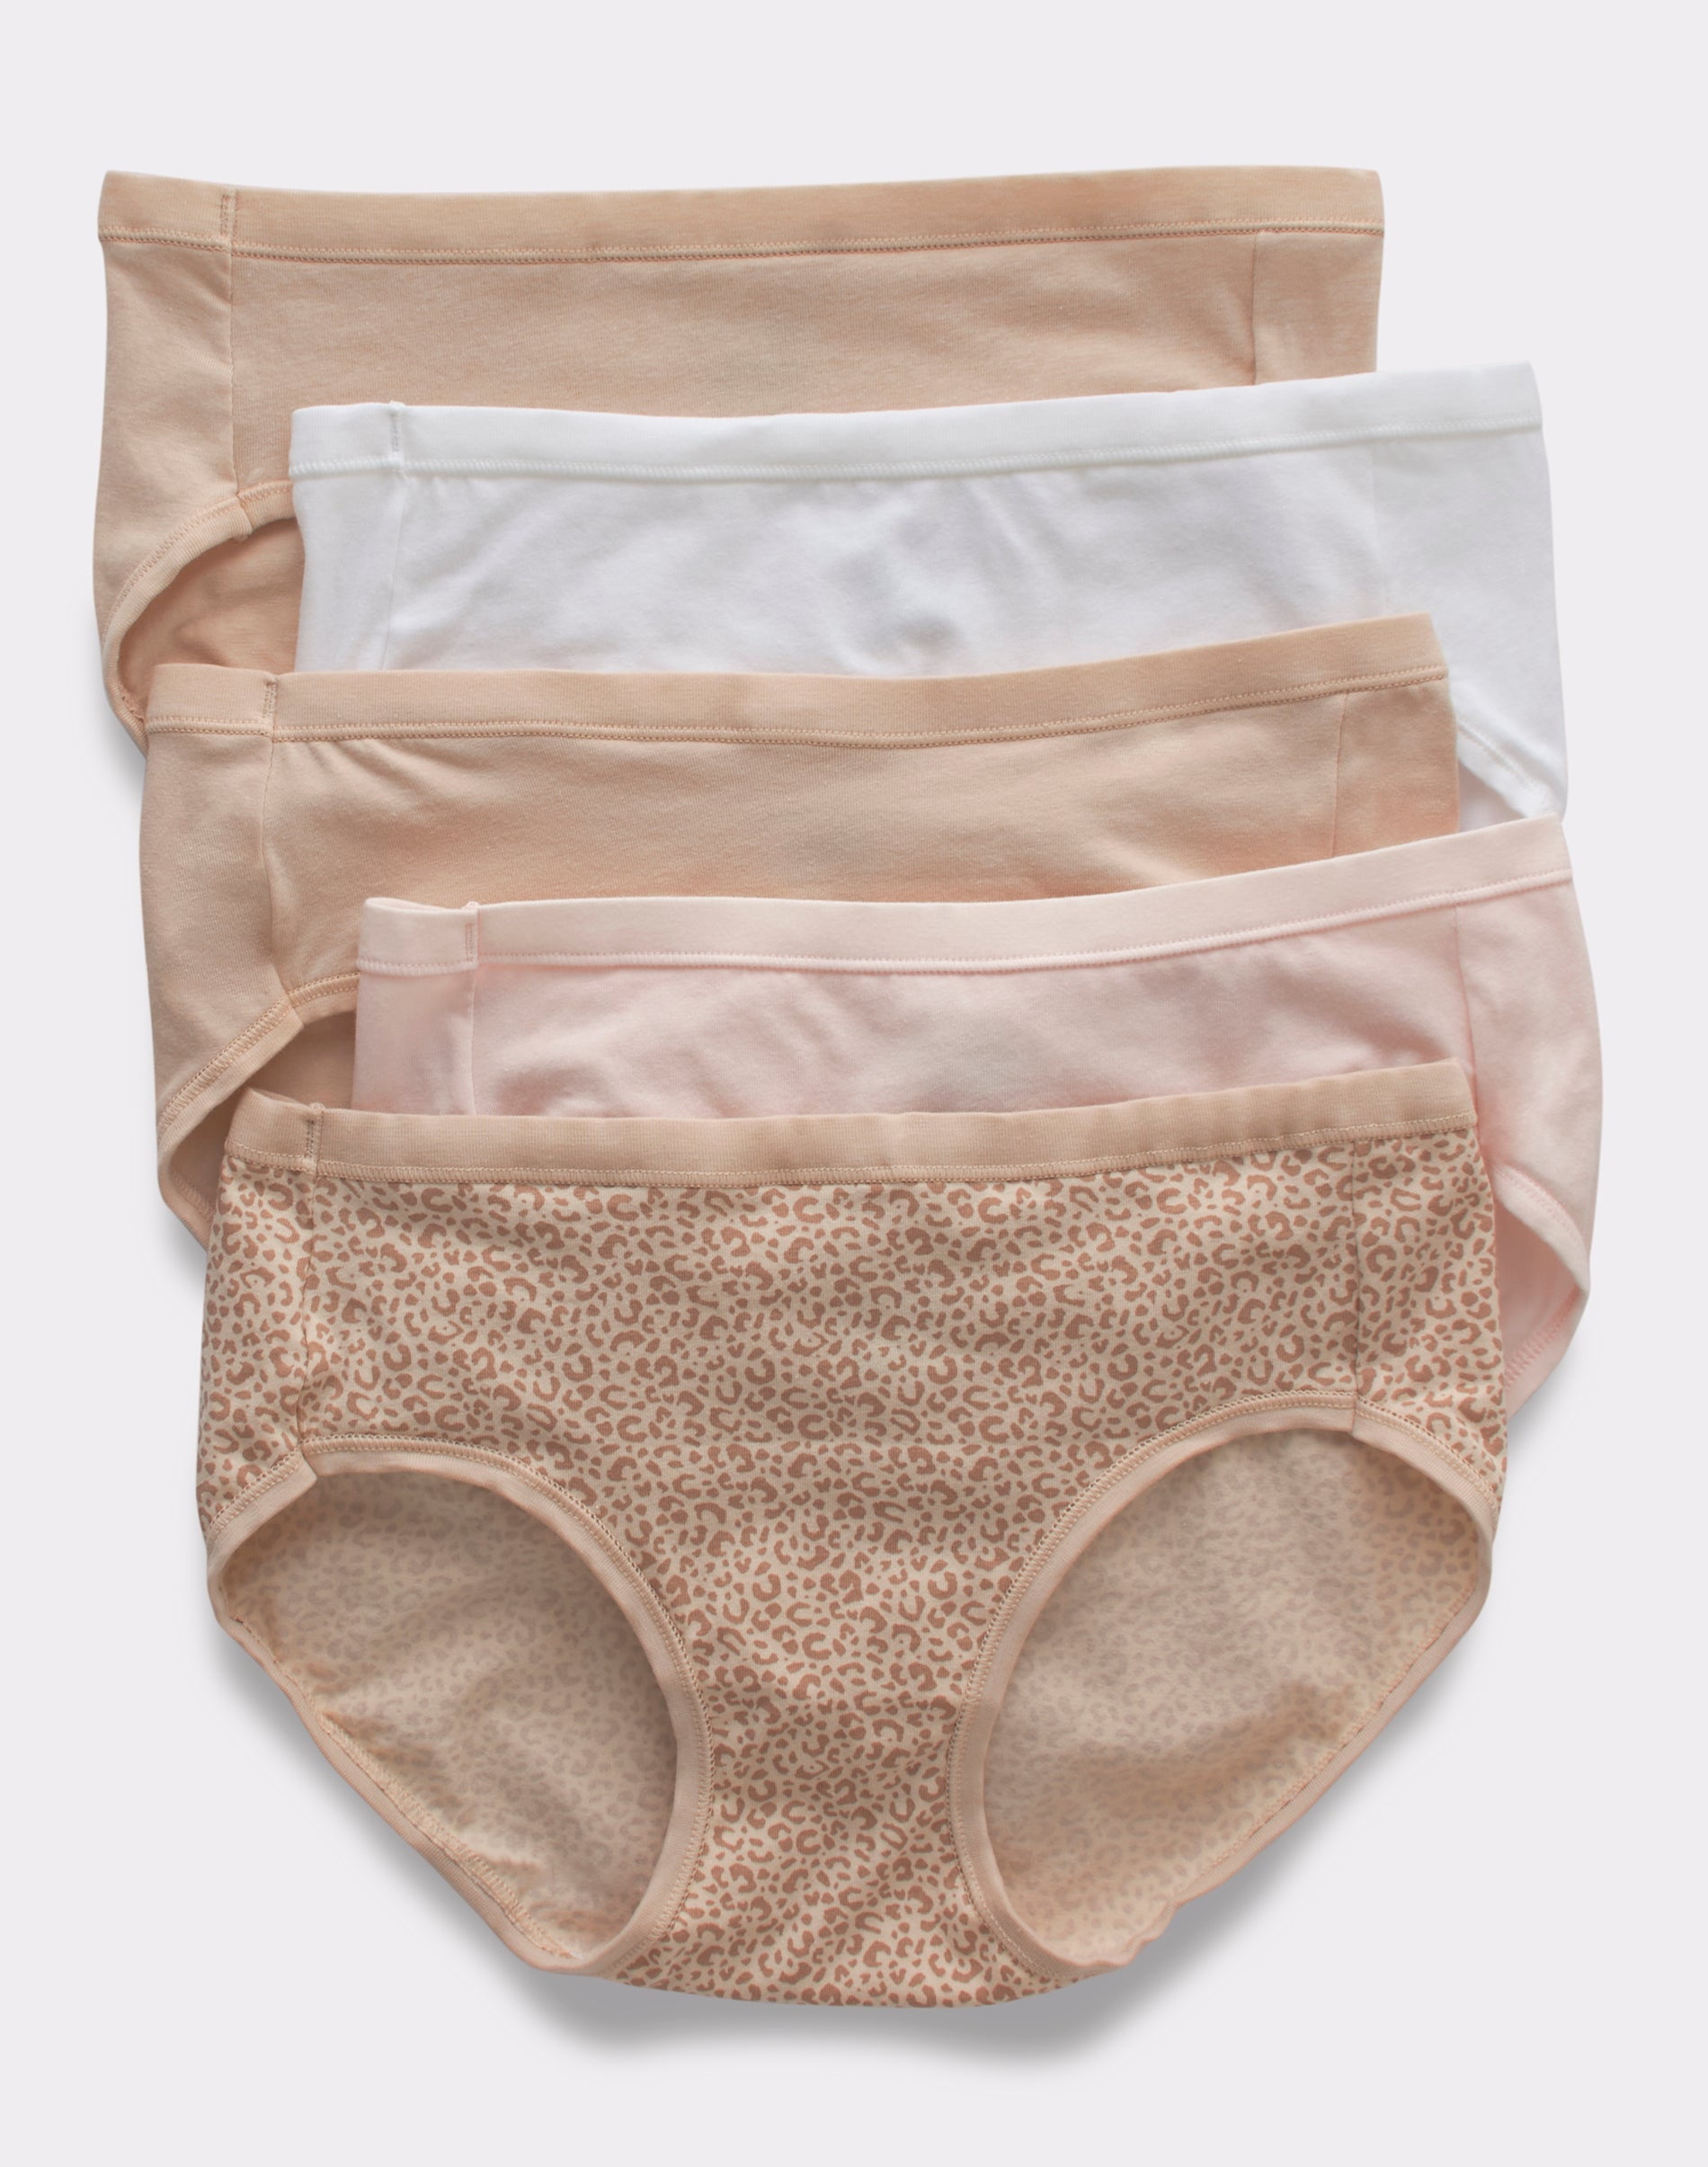 Hanes-Packaged-Underwear-for-Women - GTM Discount General Stores